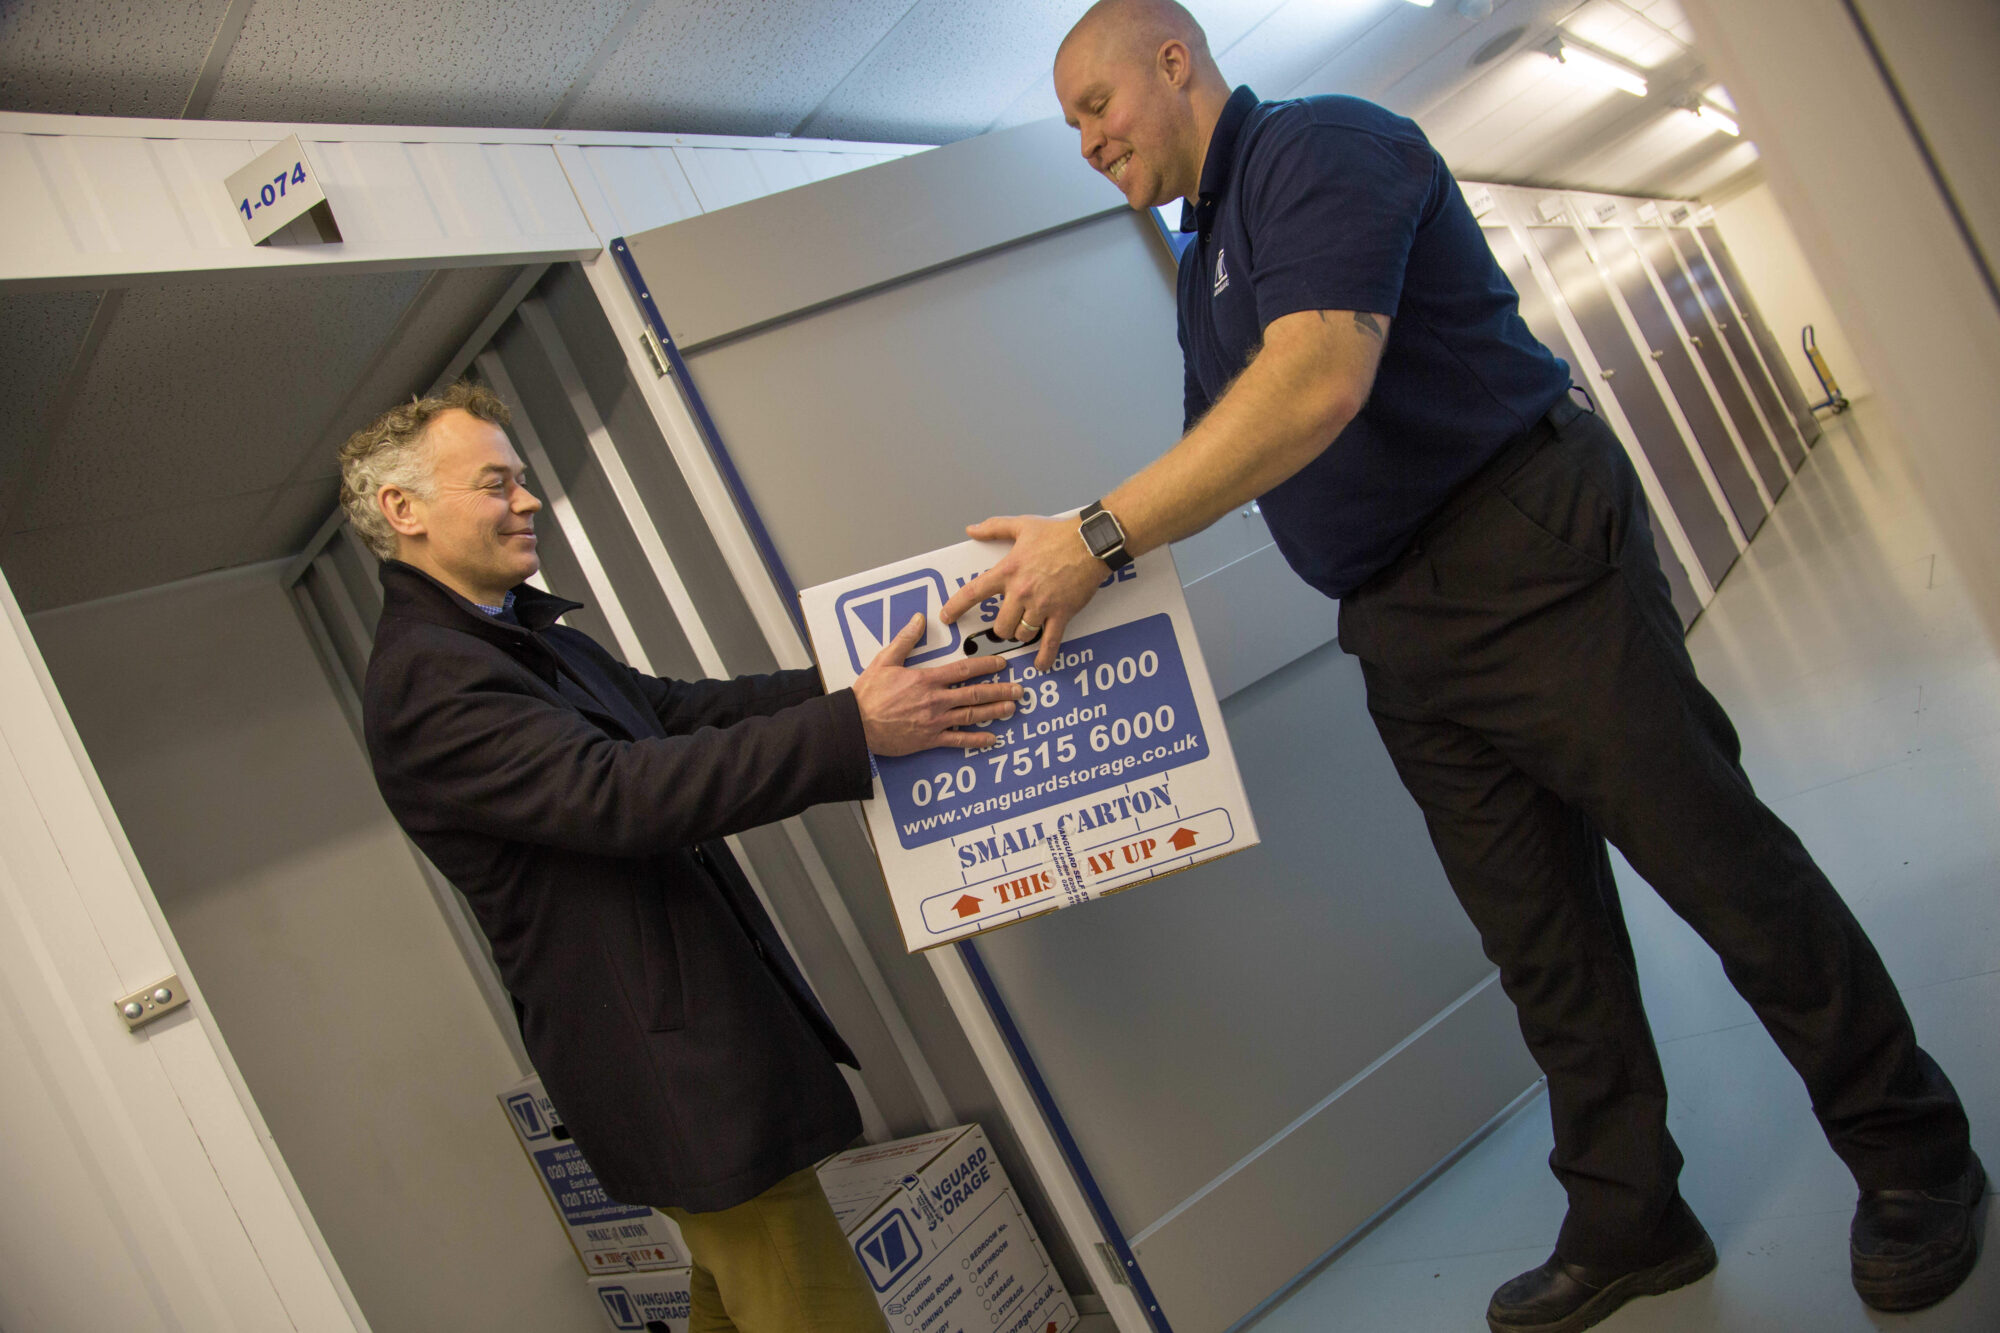 A photo showing a Vanguard employee helping a customer carry a Vanguard cardboard box into a self-storage unit.